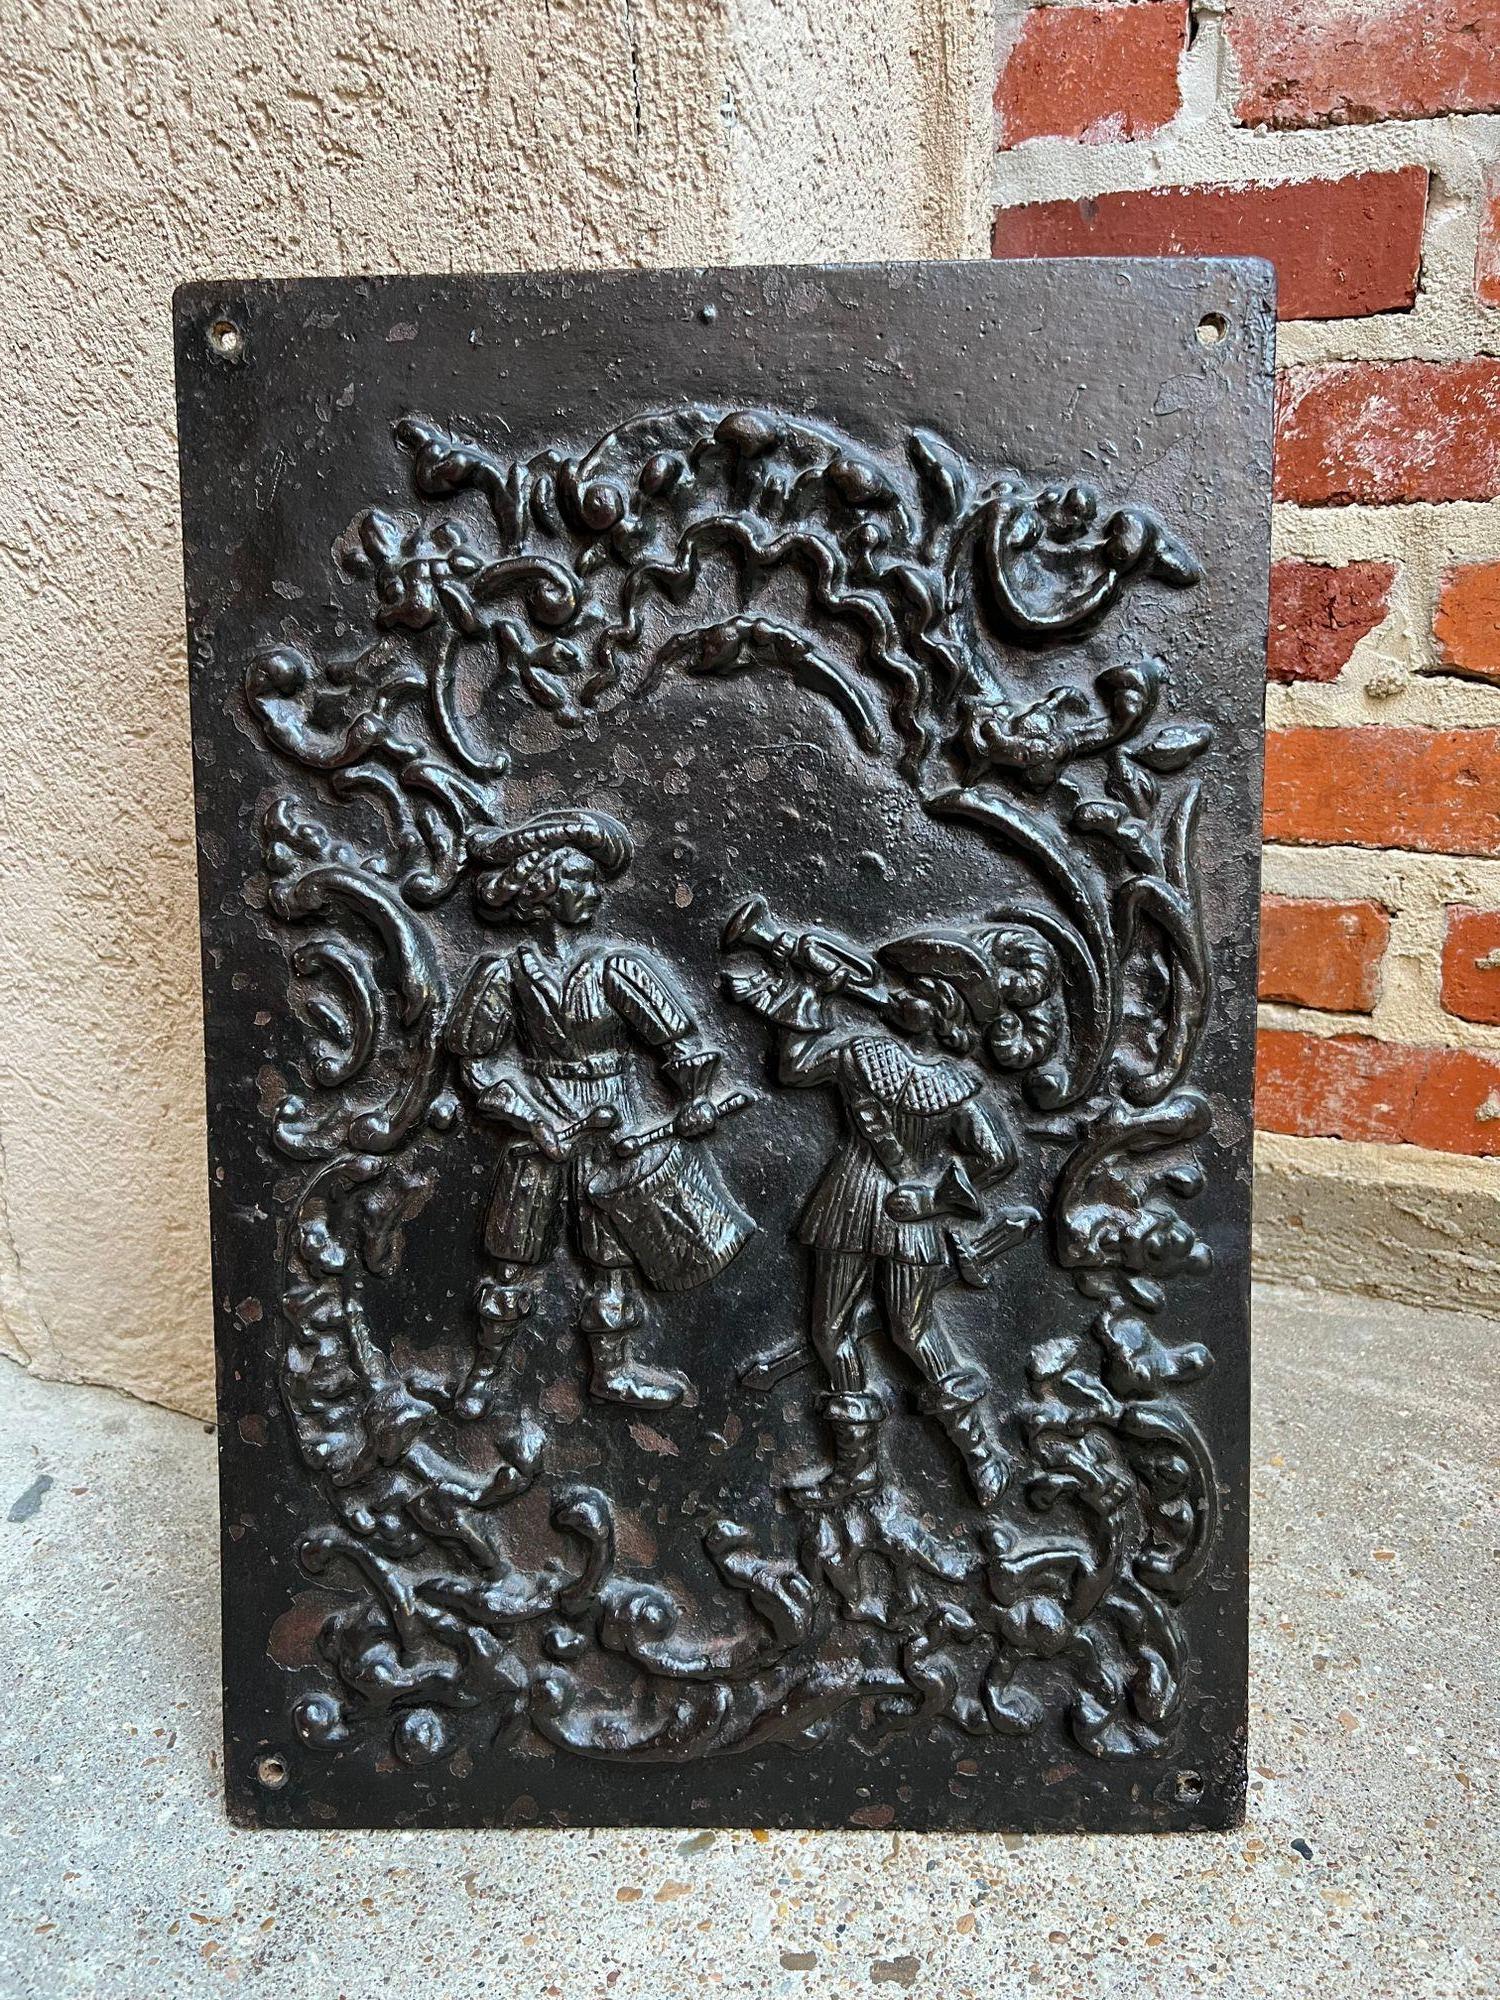 Antique English Fireback Cast Iron Hearth Panel Kitchen Backsplash 19th century.
 
Direct from England, a very distinctive 19th century English cast iron hearth panel or ‘fireback’.
The slender cast panel is highly detailed, with excellent relief